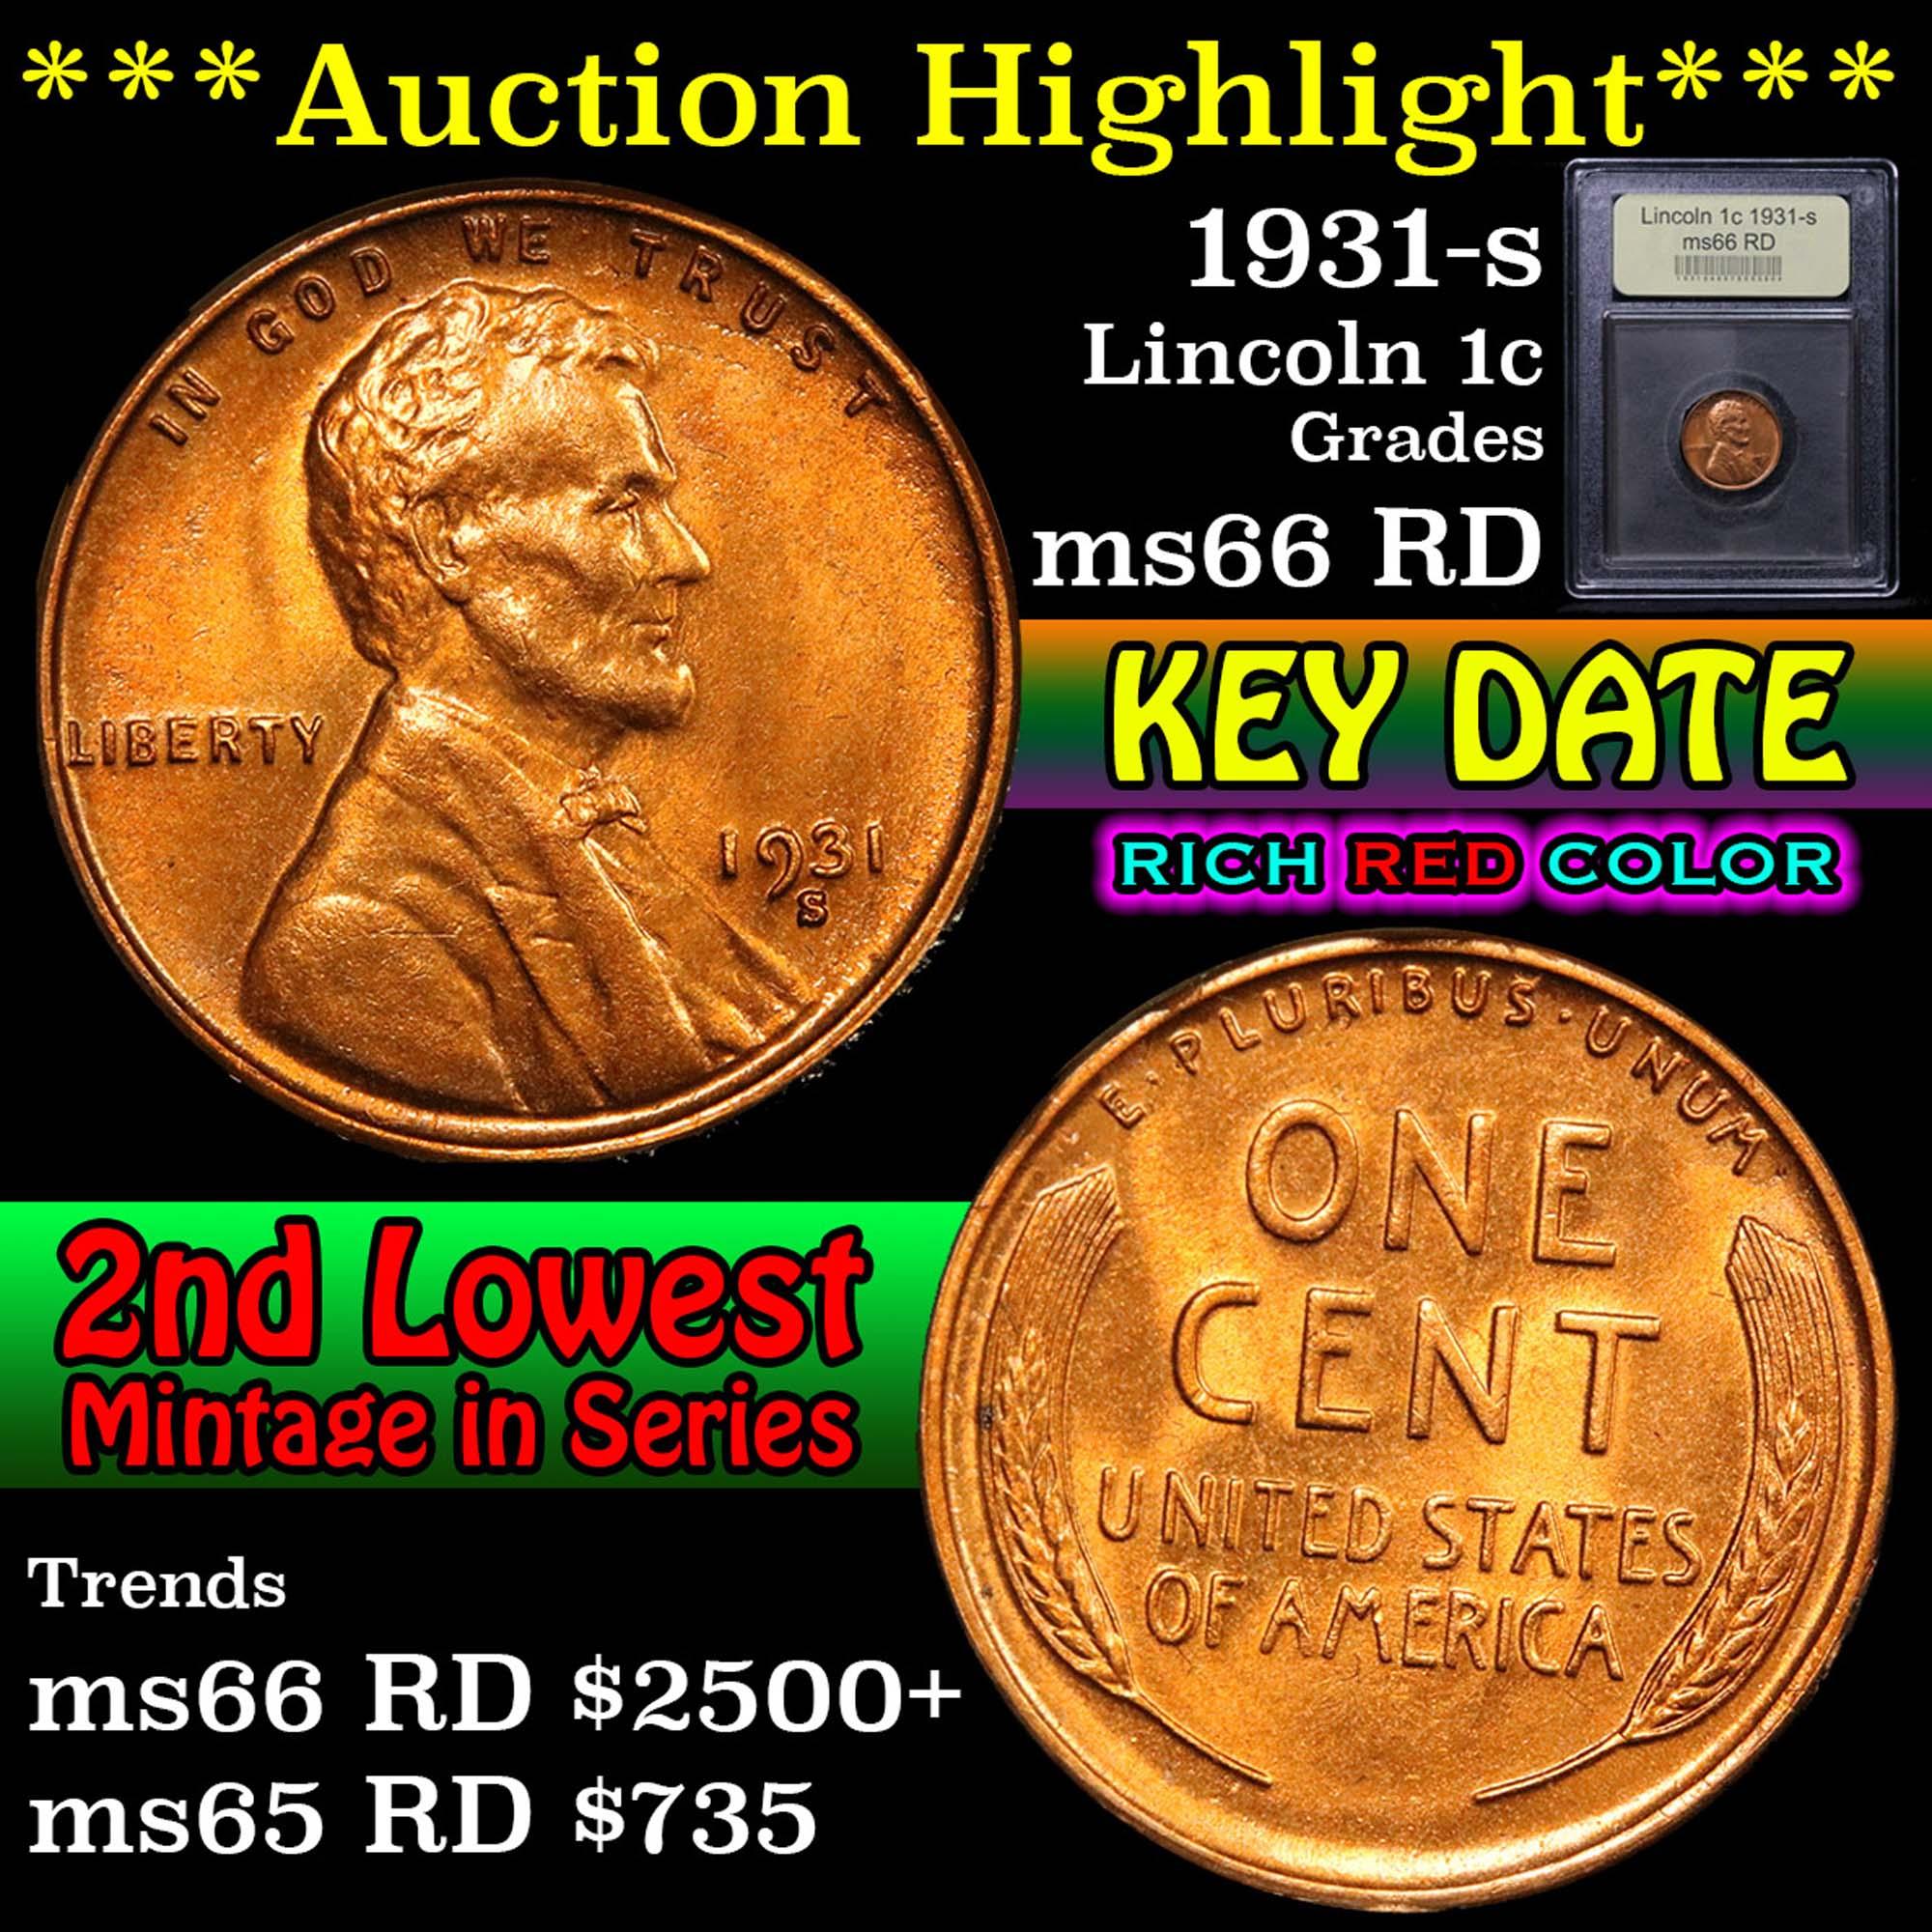 ***Auction Highlight*** 1931-s Lincoln Cent 1c Graded GEM+ Unc RD by USCG (fc)